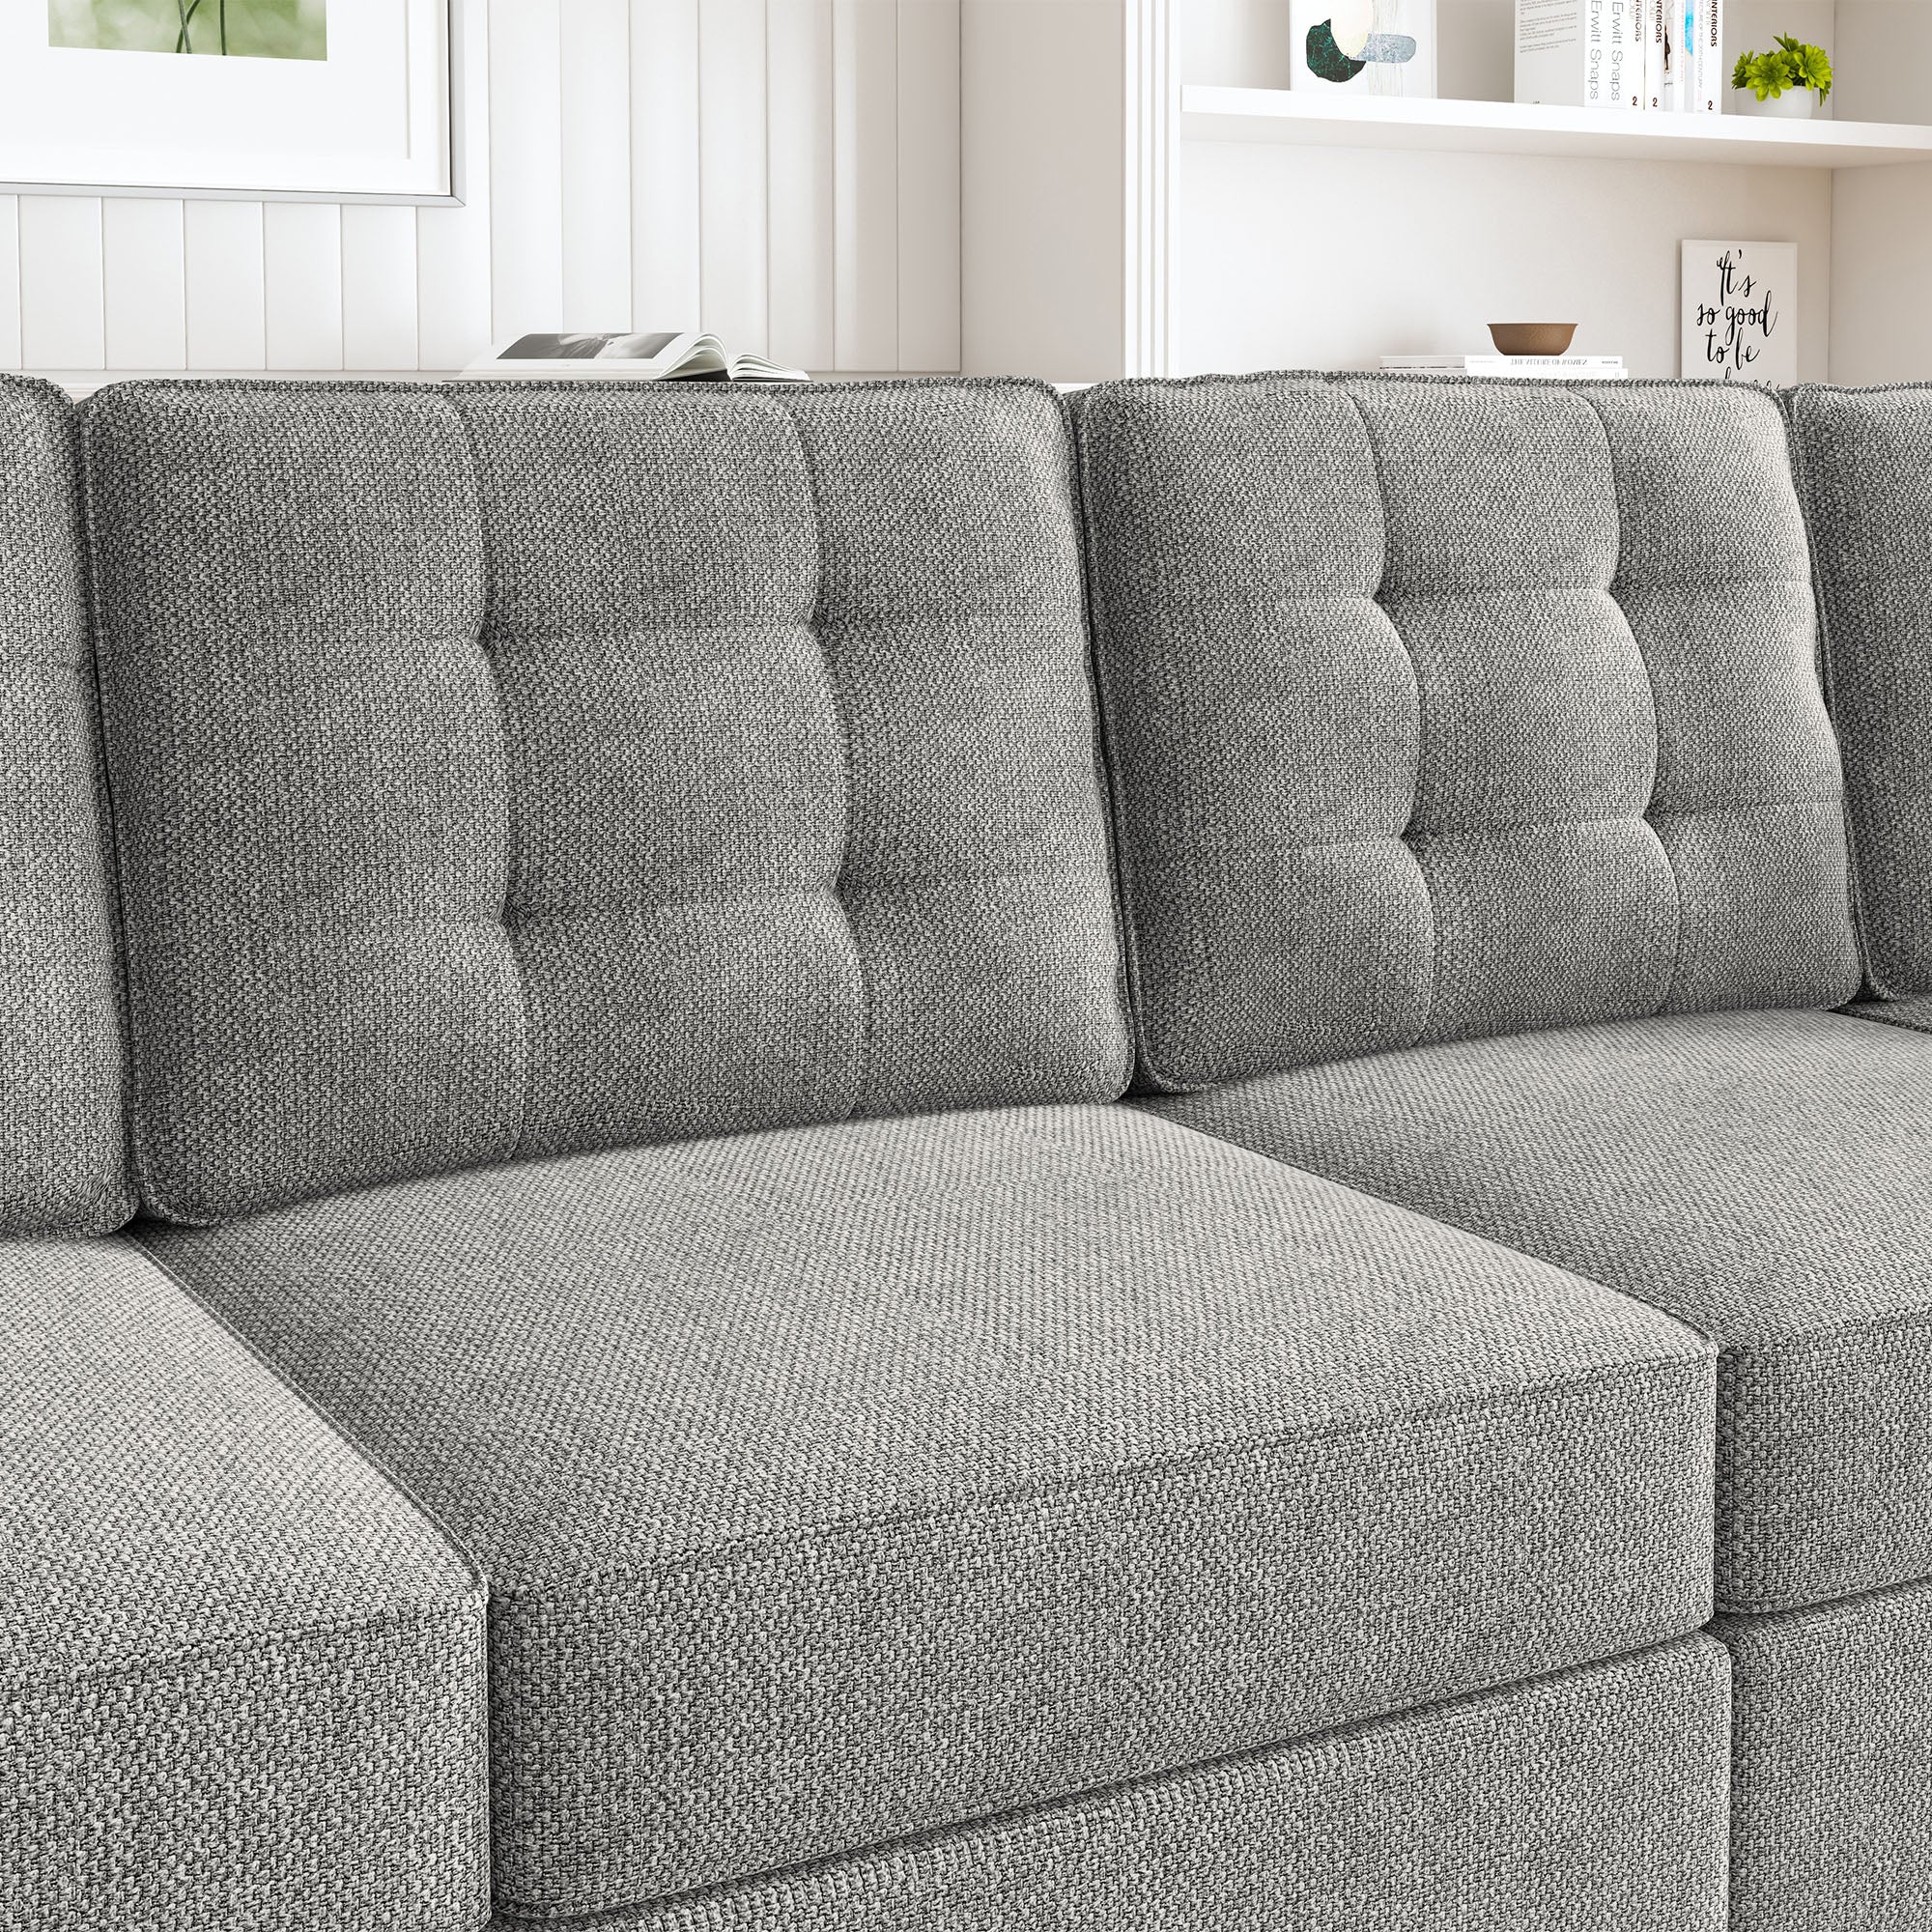 Tufted Back for HONBAY Sectional Sofa Couch